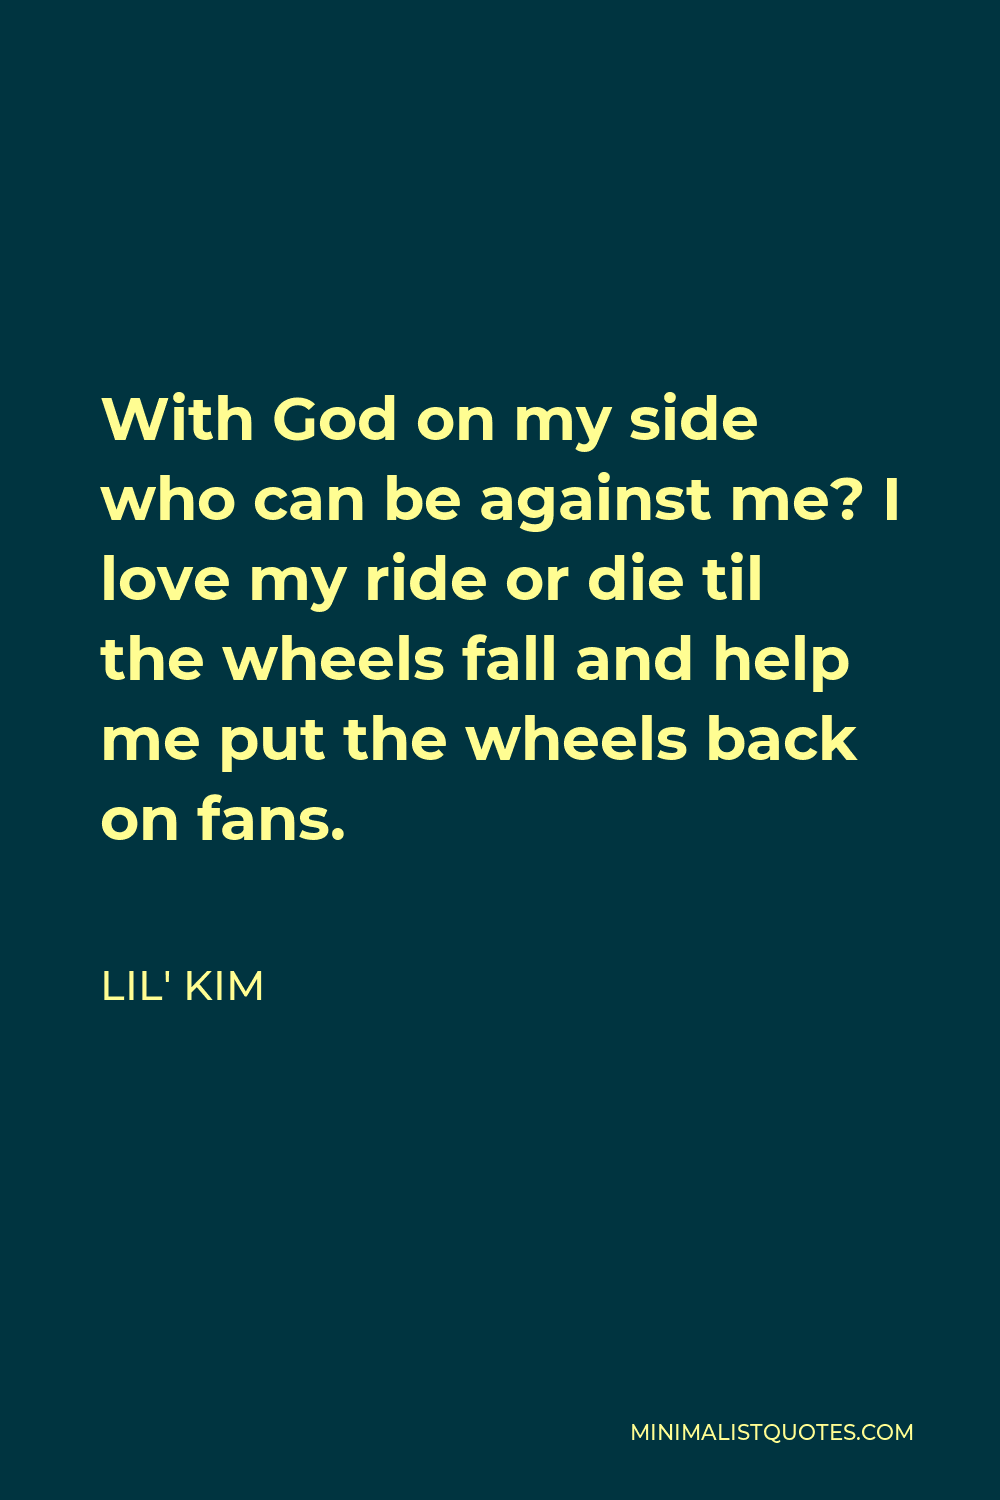 Lil' Kim Quote: With God on my side who can be against me? I love my ride  or die til the wheels fall and help me put the wheels back on fans.